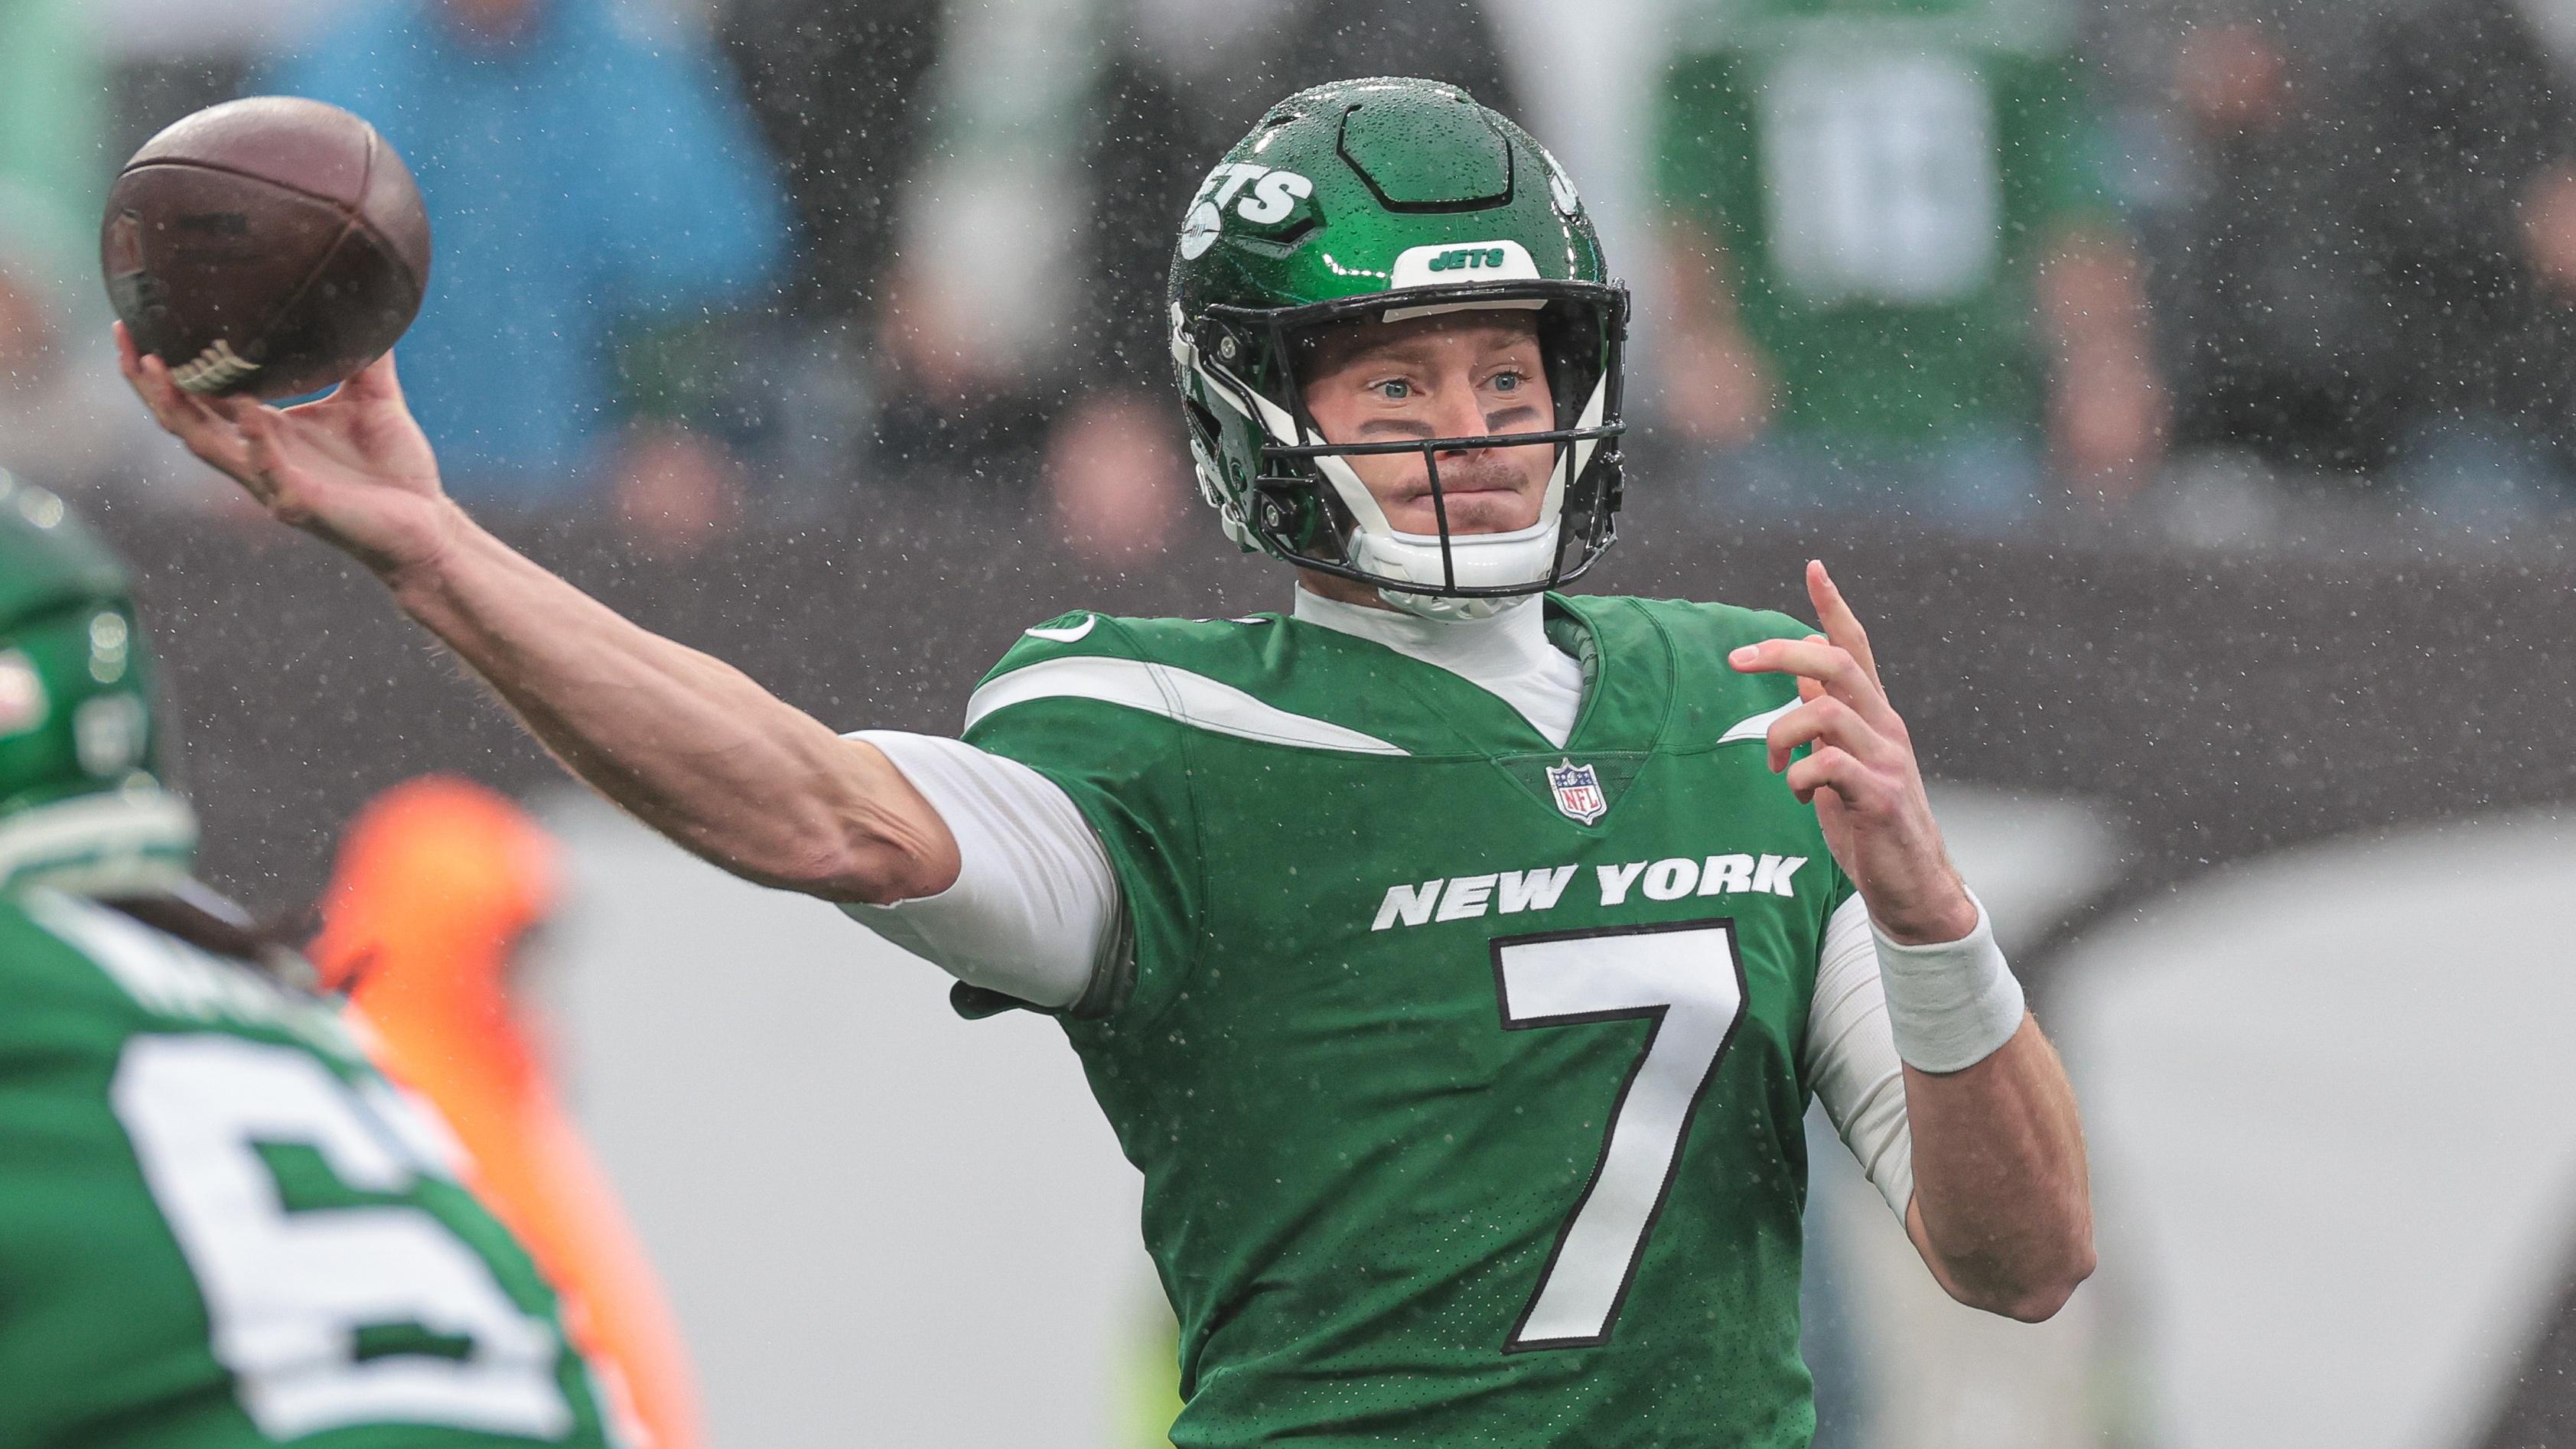 New York Jets quarterback Tim Boyle (7) throws the ball during the first quarter against the Atlanta Falcons at MetLife Stadium / Vincent Carchietta - USA TODAY Sports